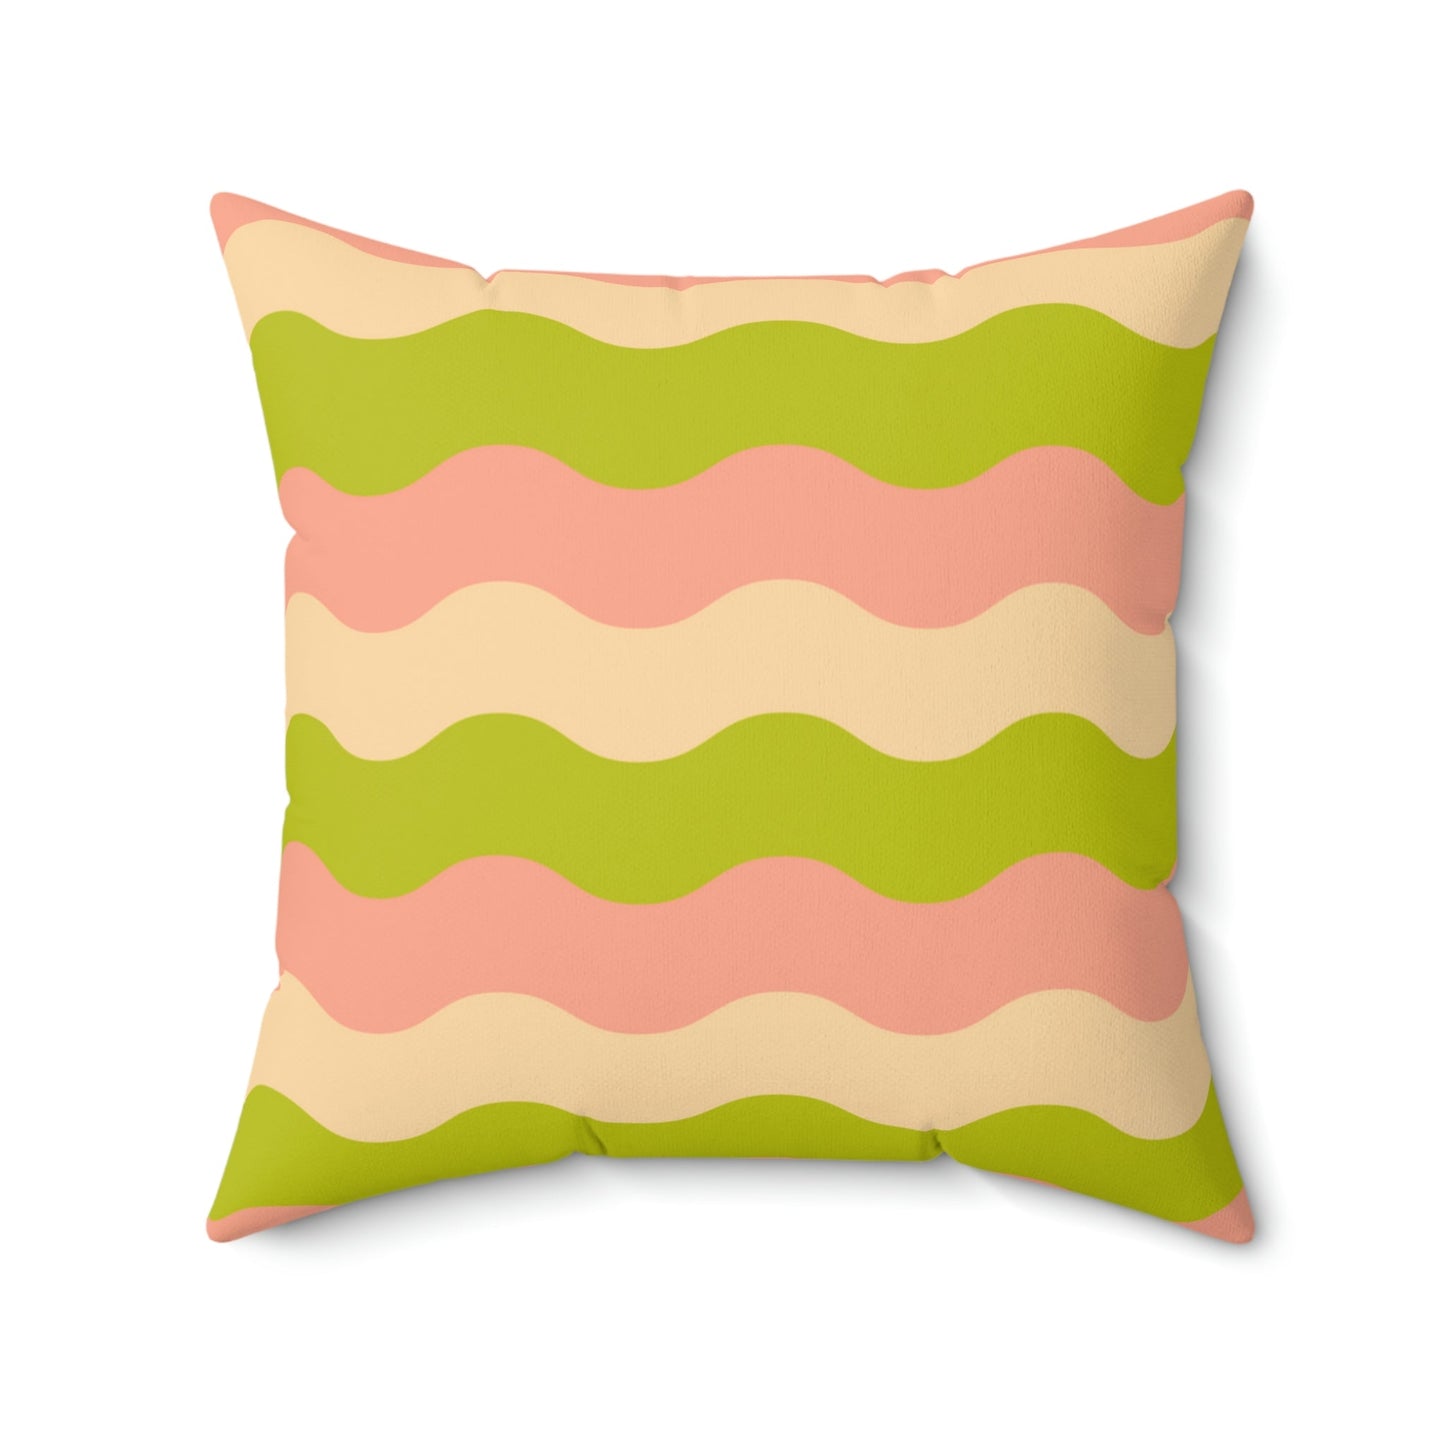 Layered Waves Square Pillow Home Decor Pink Sweetheart